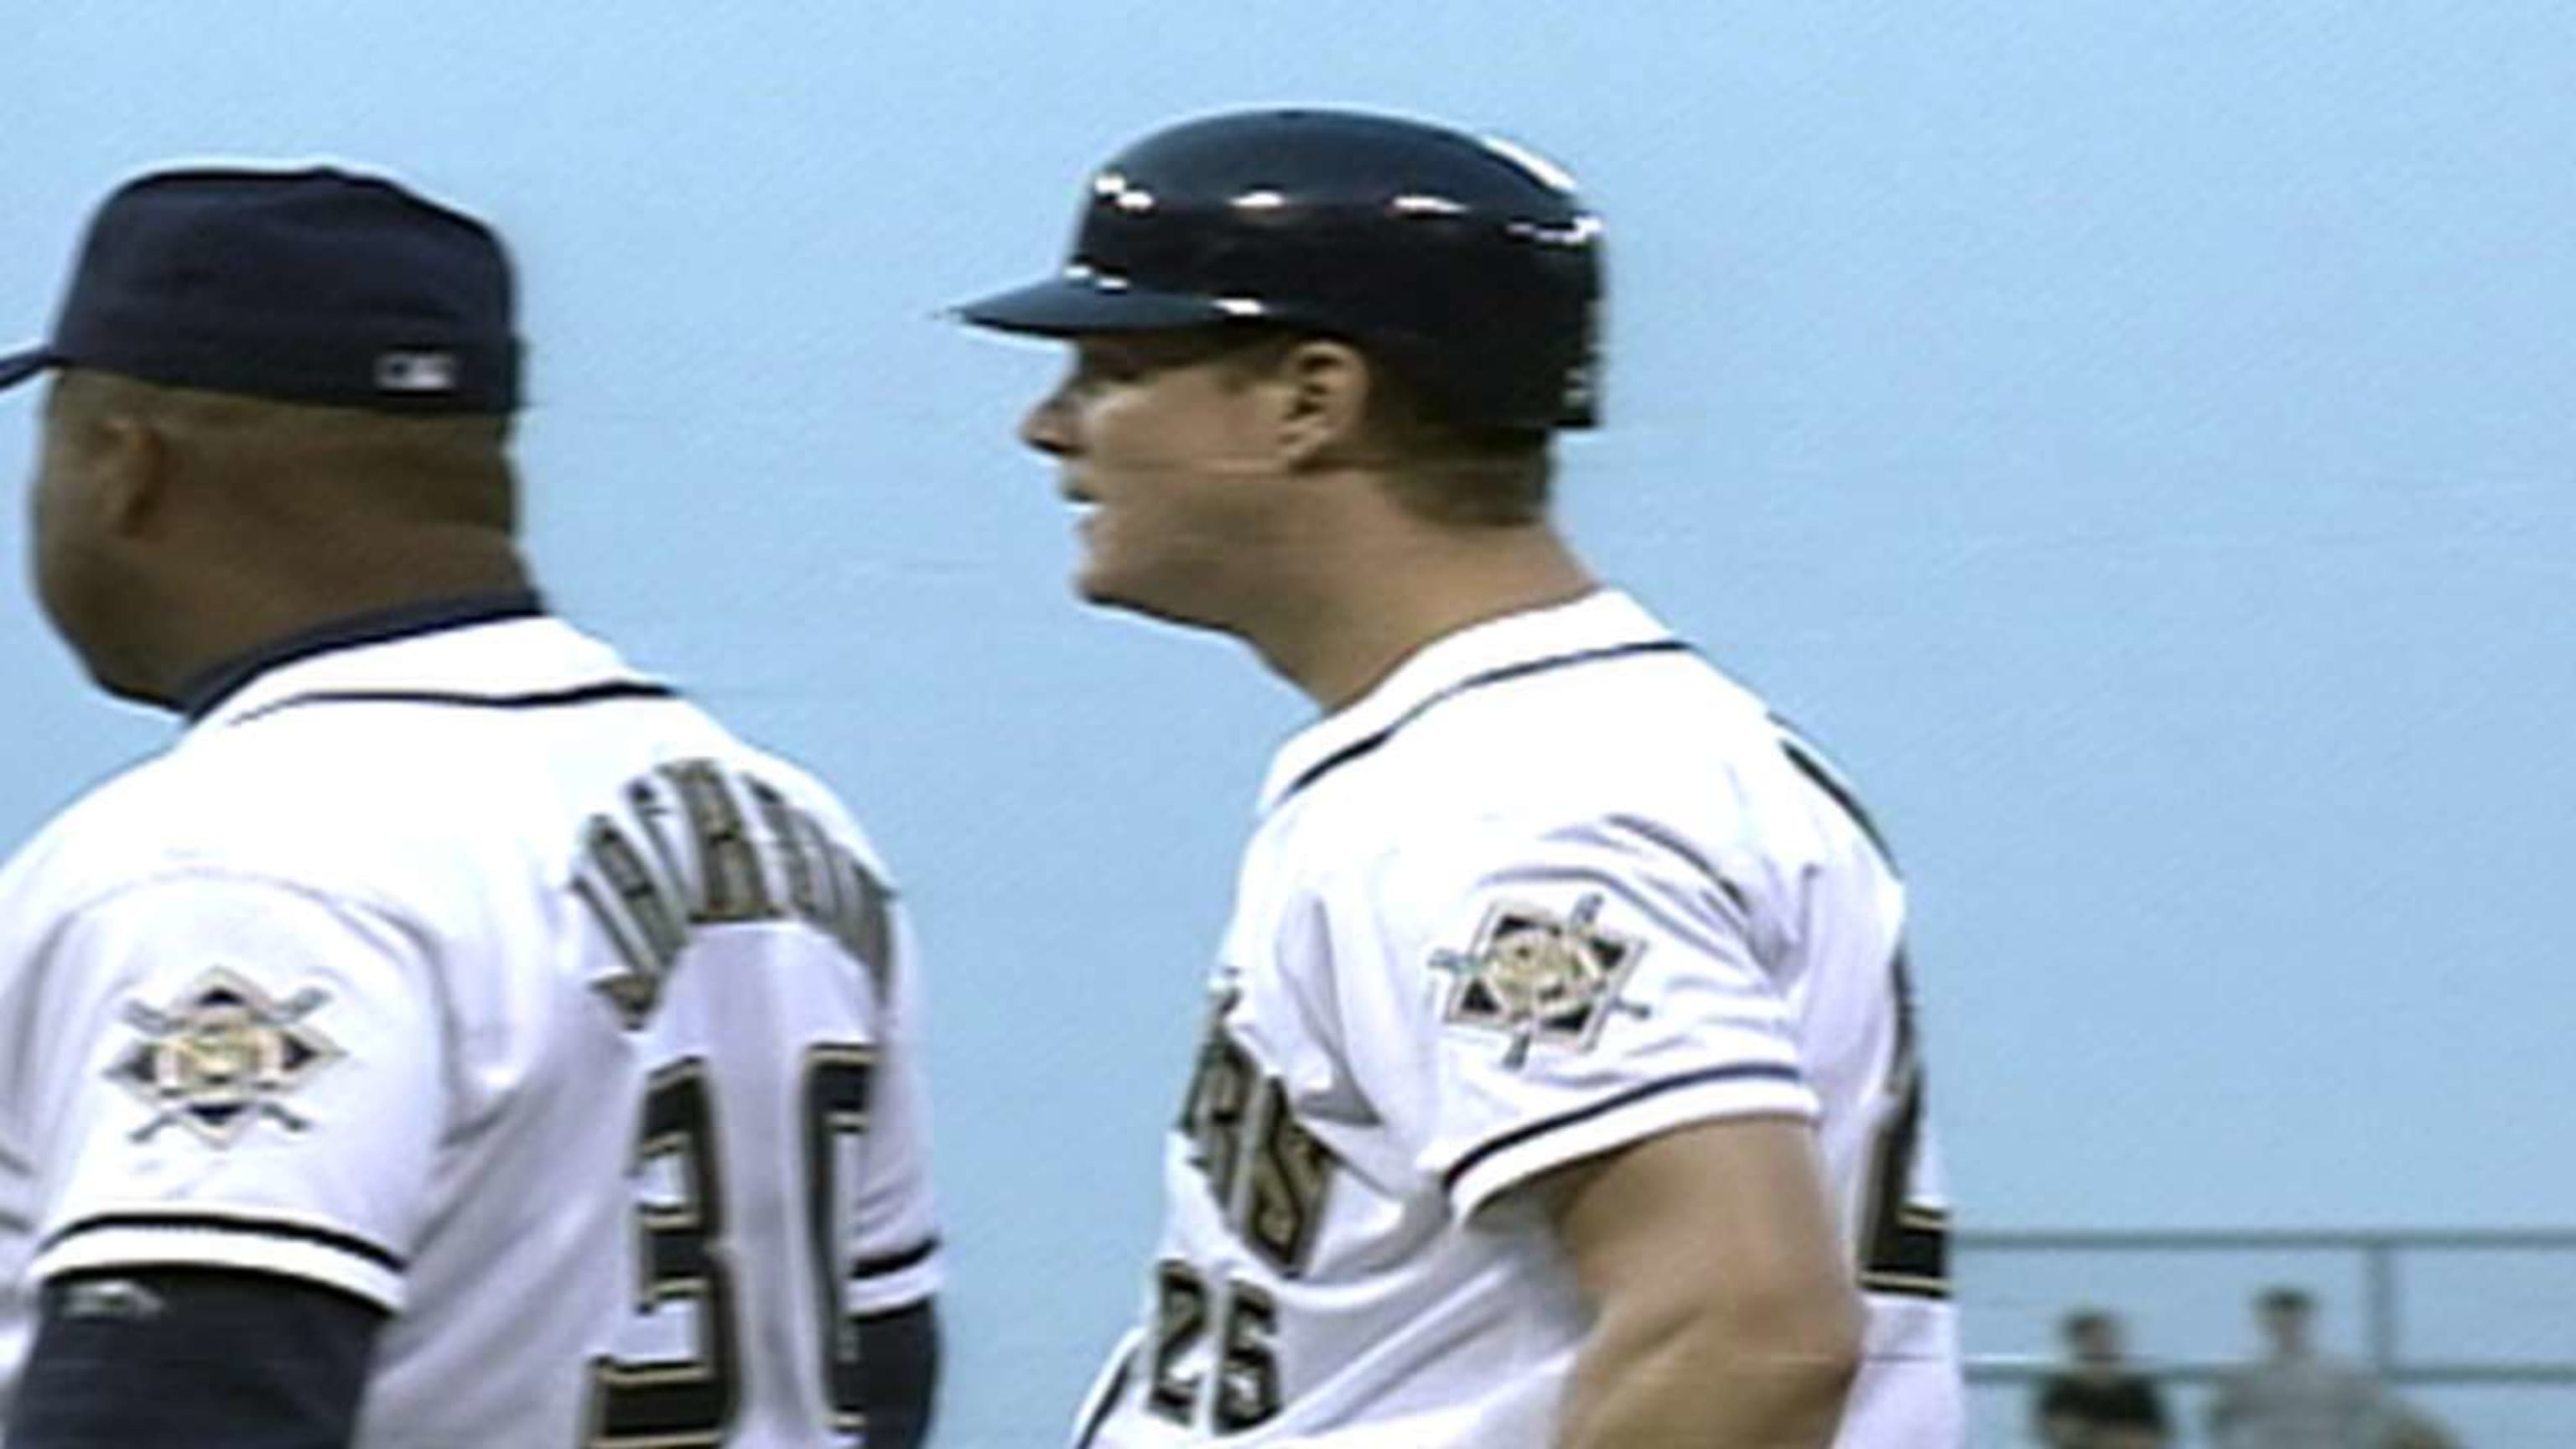 Twenty years later, Jim Abbott continues to pitch inspiration